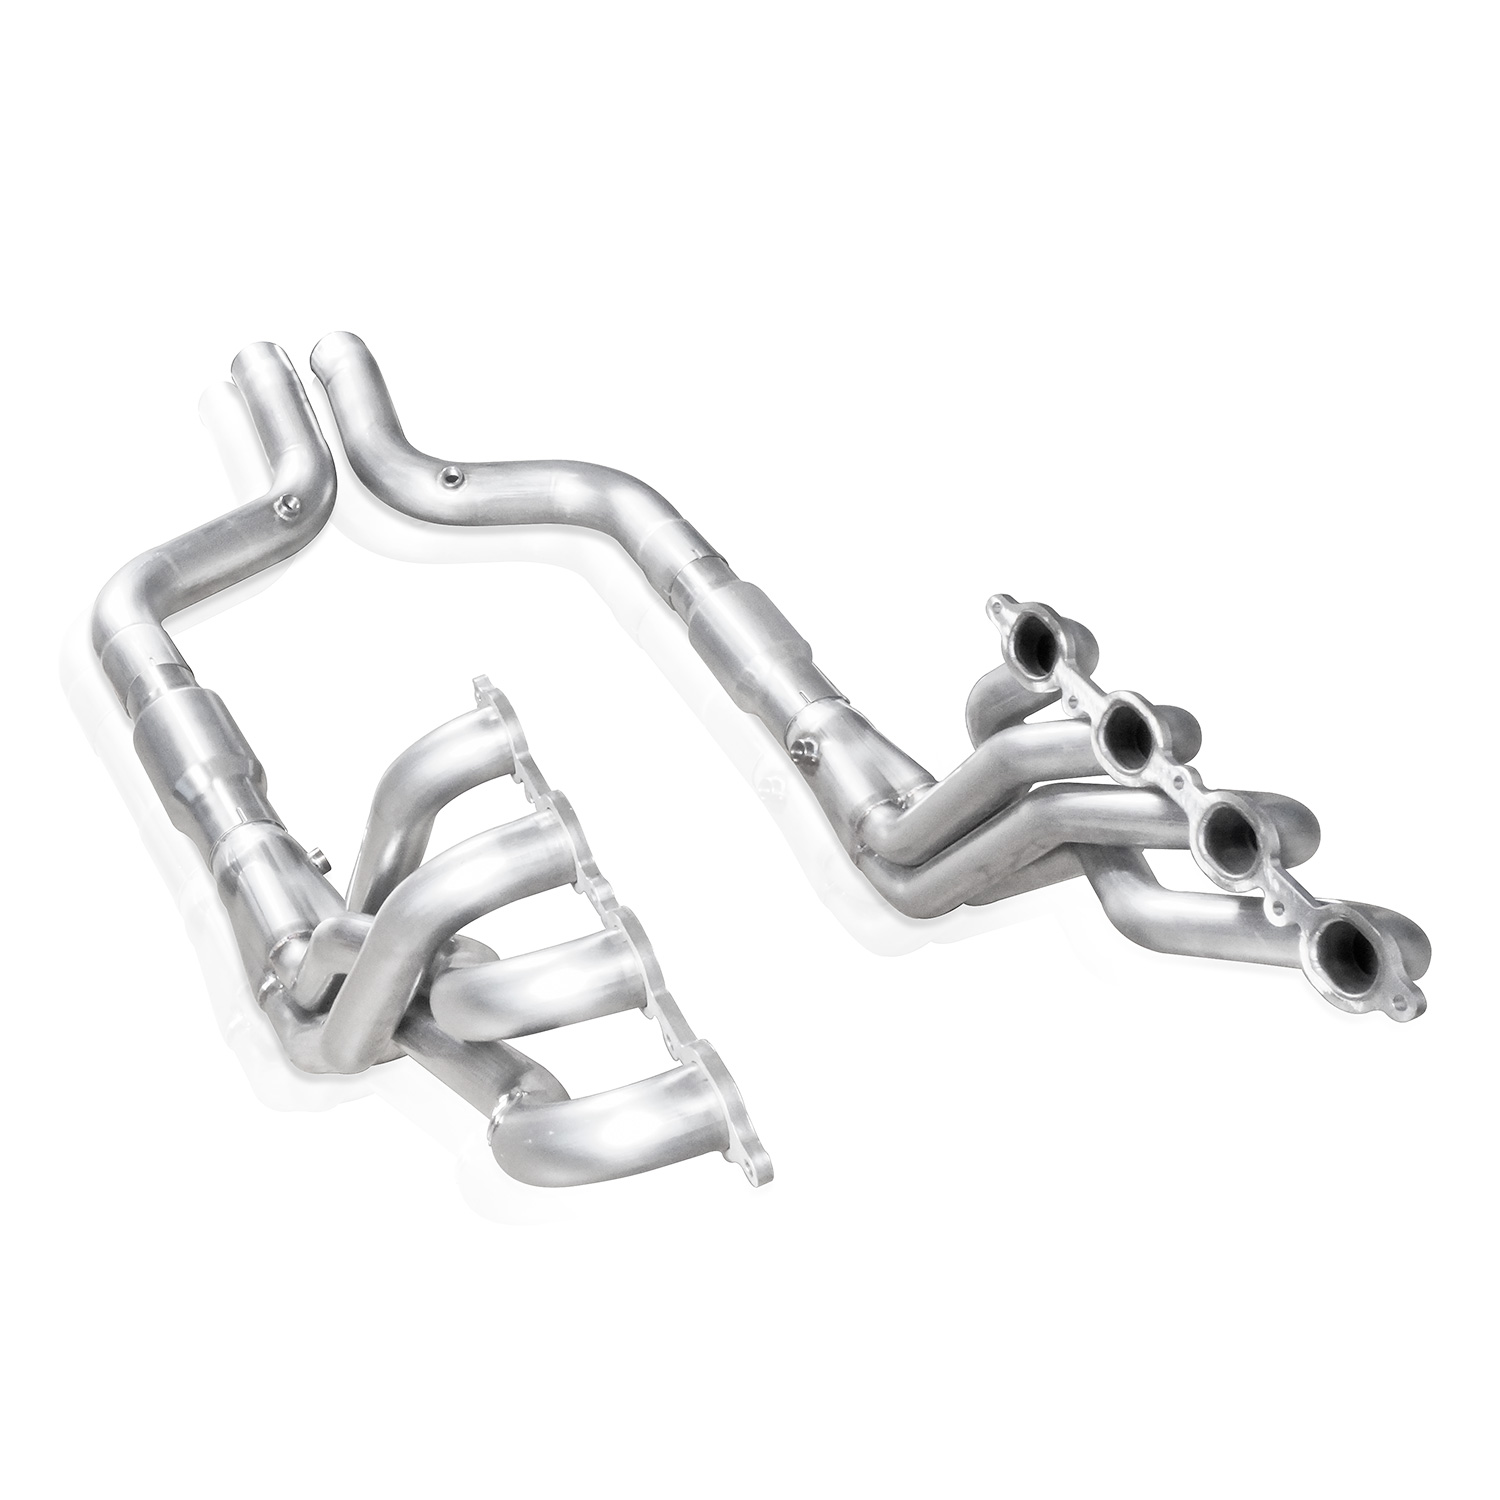 2016-2021 Camaro SS 6.2L SW Headers 2" With Catted Leads Performance Connect